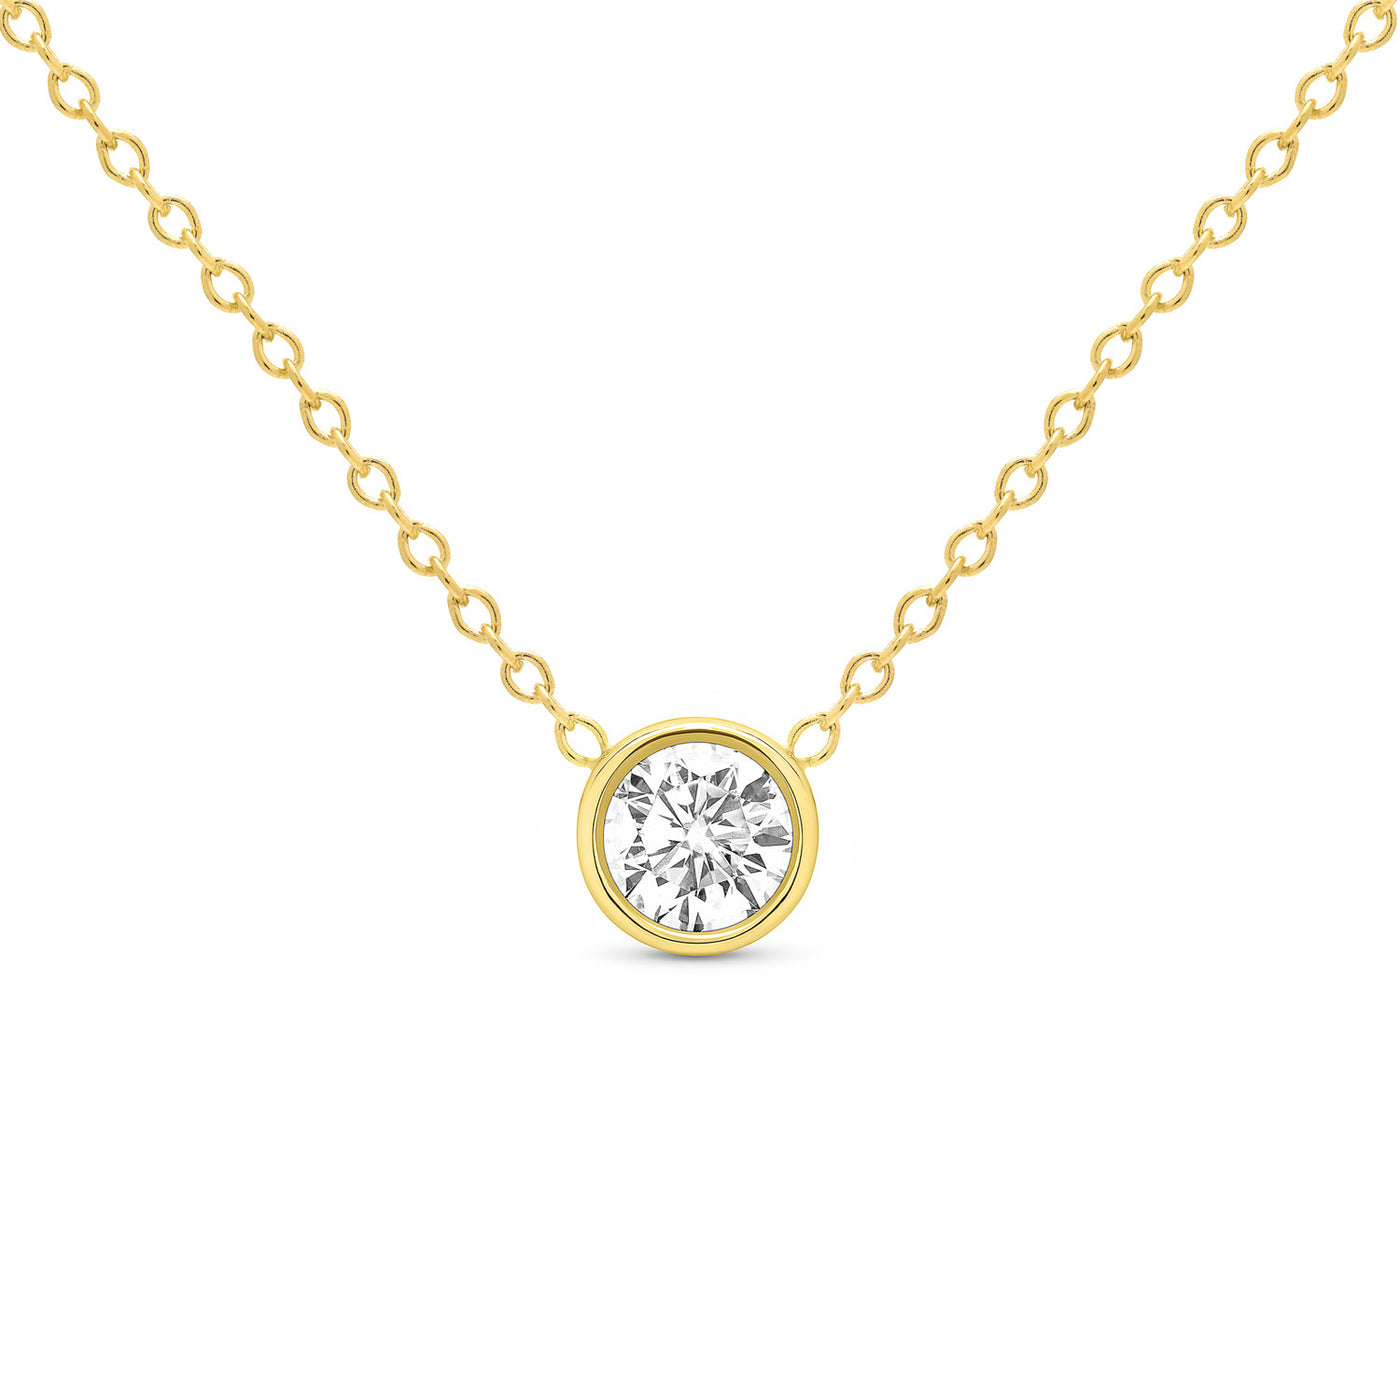 14K Solid Gold Diamond Solitaire Round Bezel Necklace